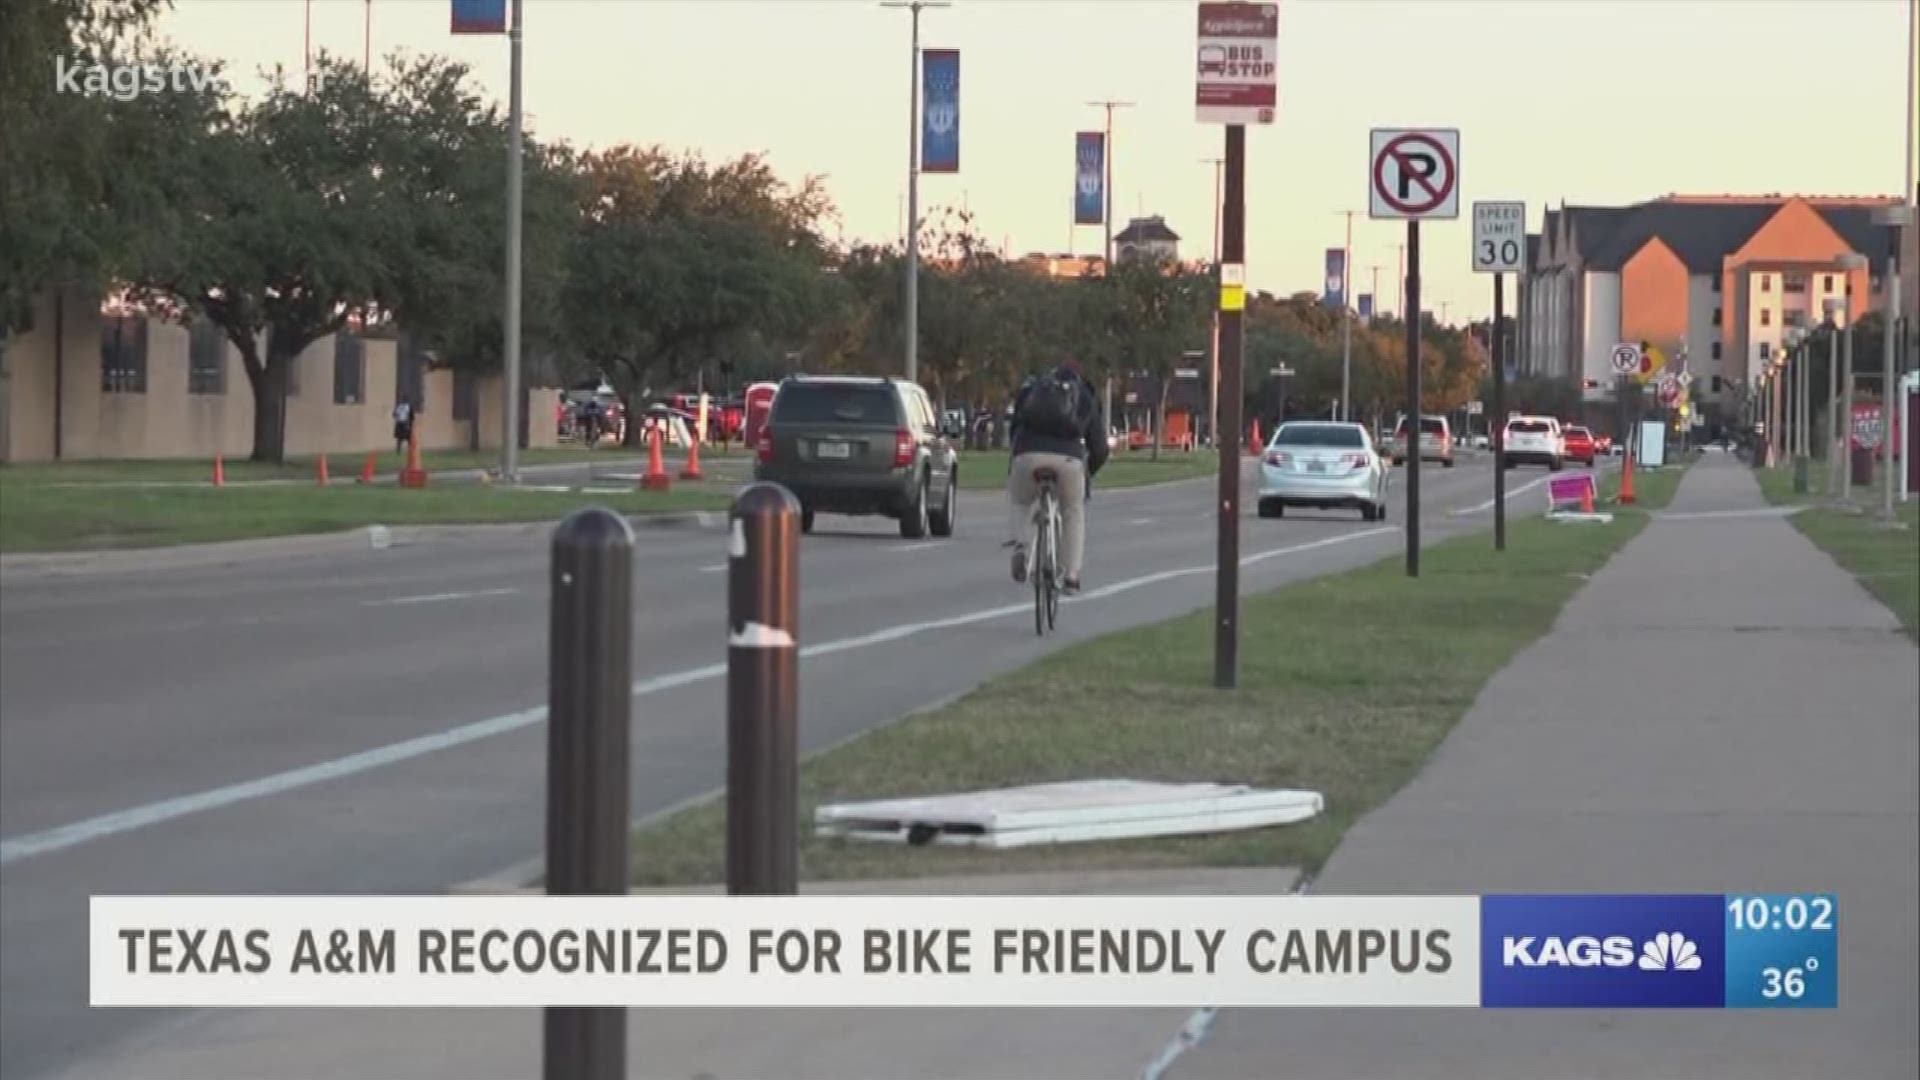 Texas A&M is one of the safest universities in Texas for bikes according to a group representing bicyclists nationwide.